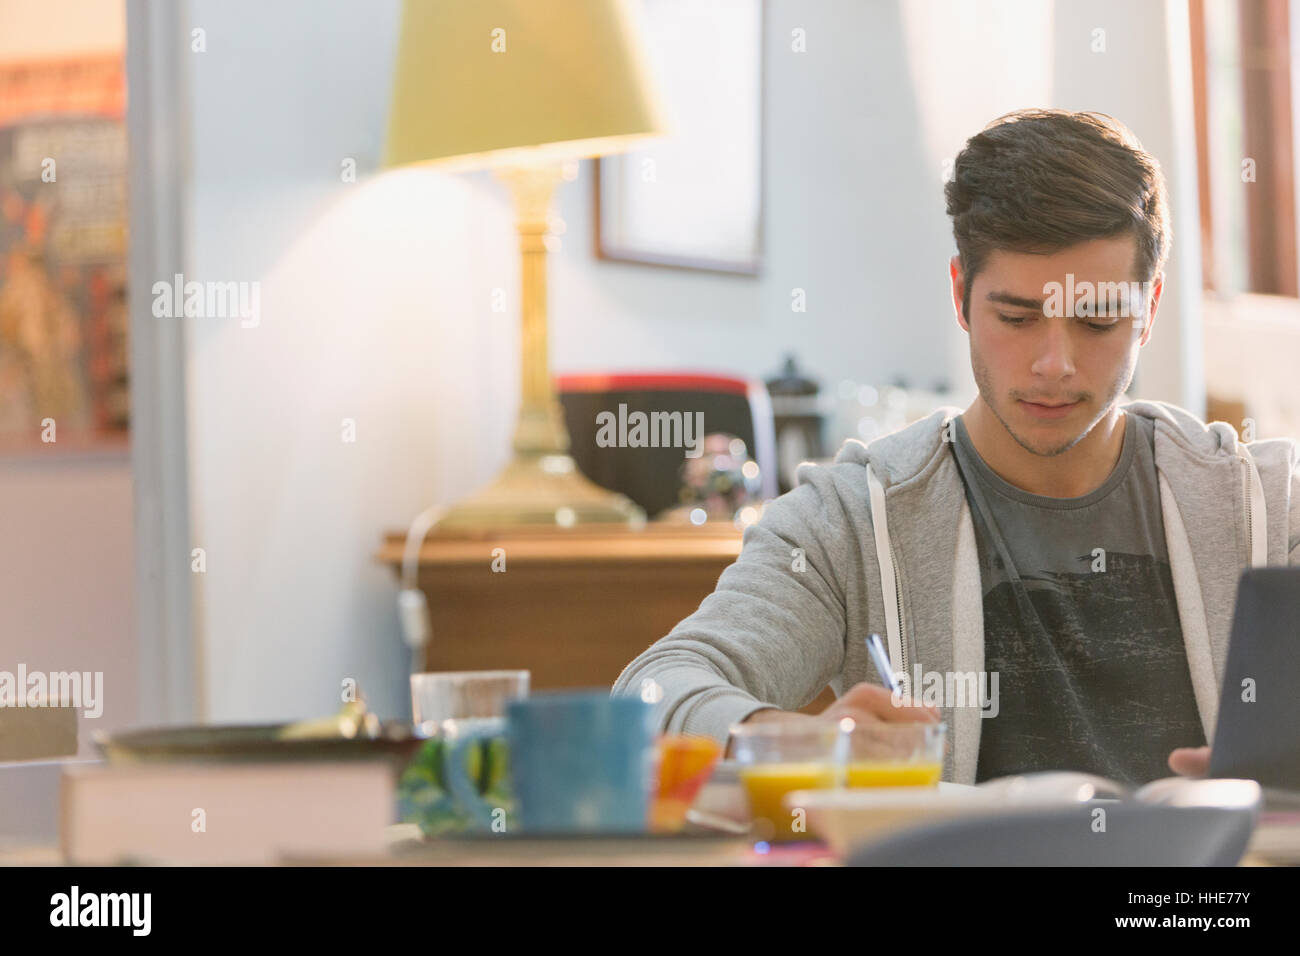 Young man college student studying at breakfast table Stock Photo